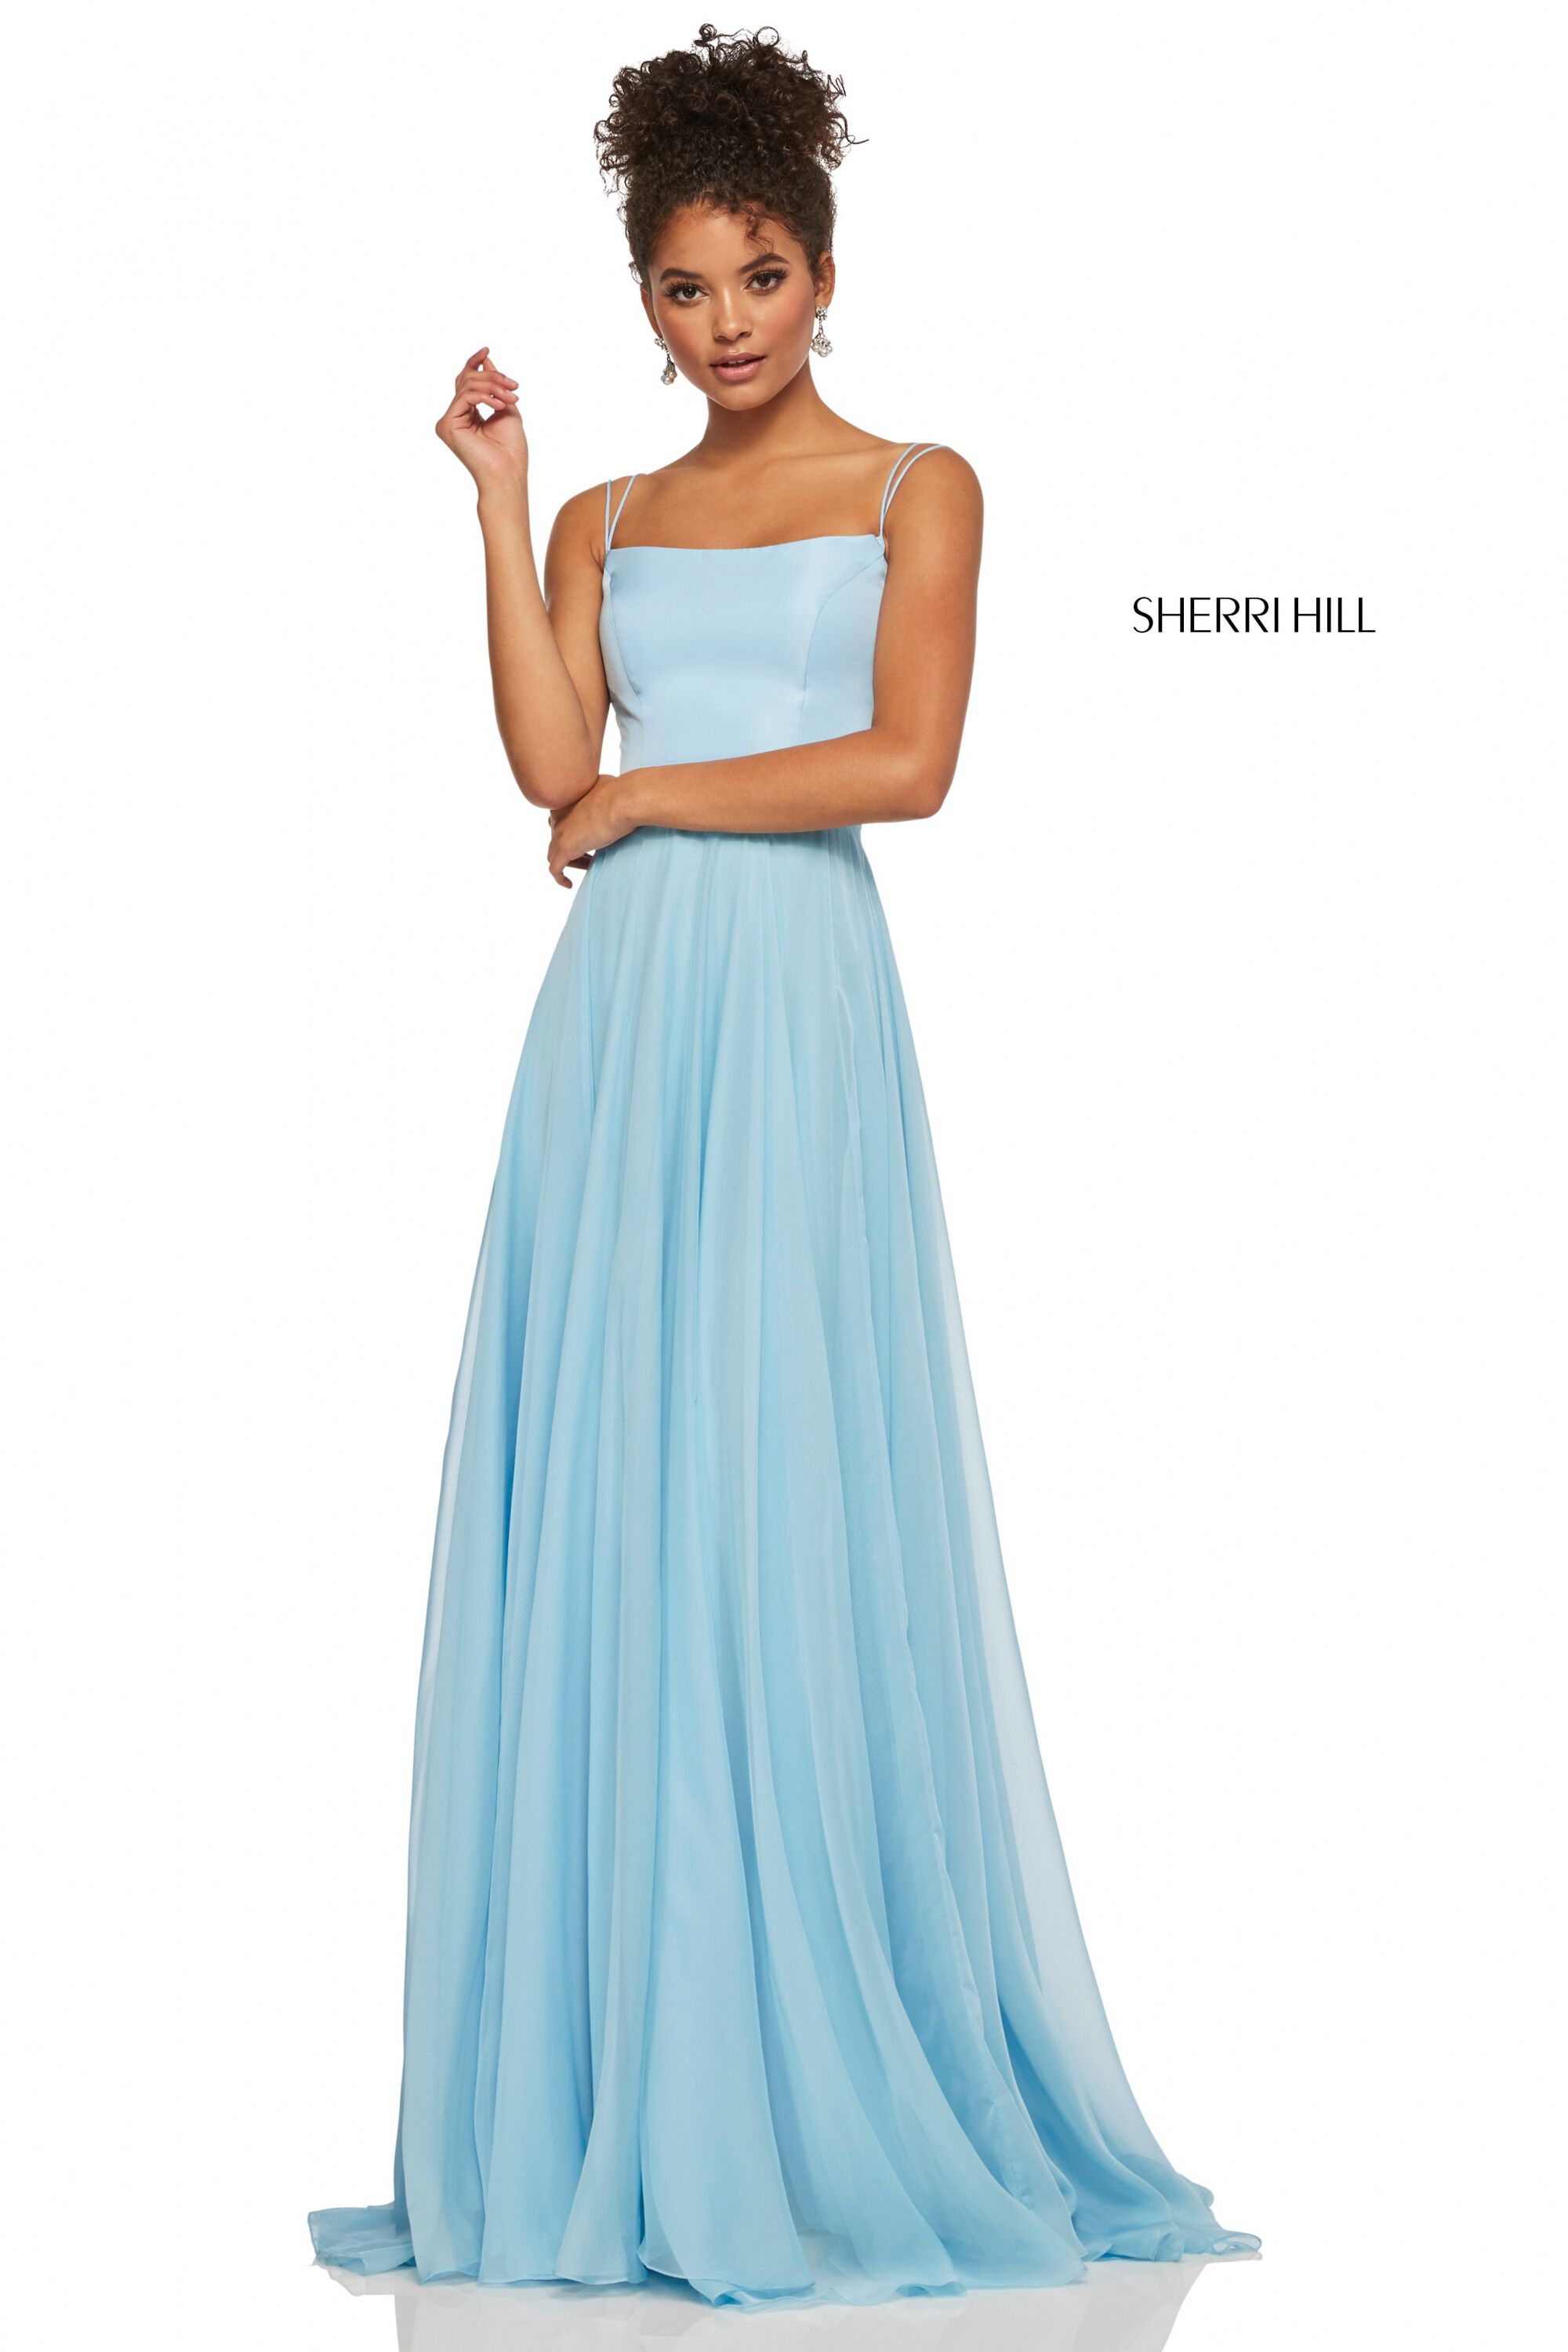 style № 52839 designed by SherriHill